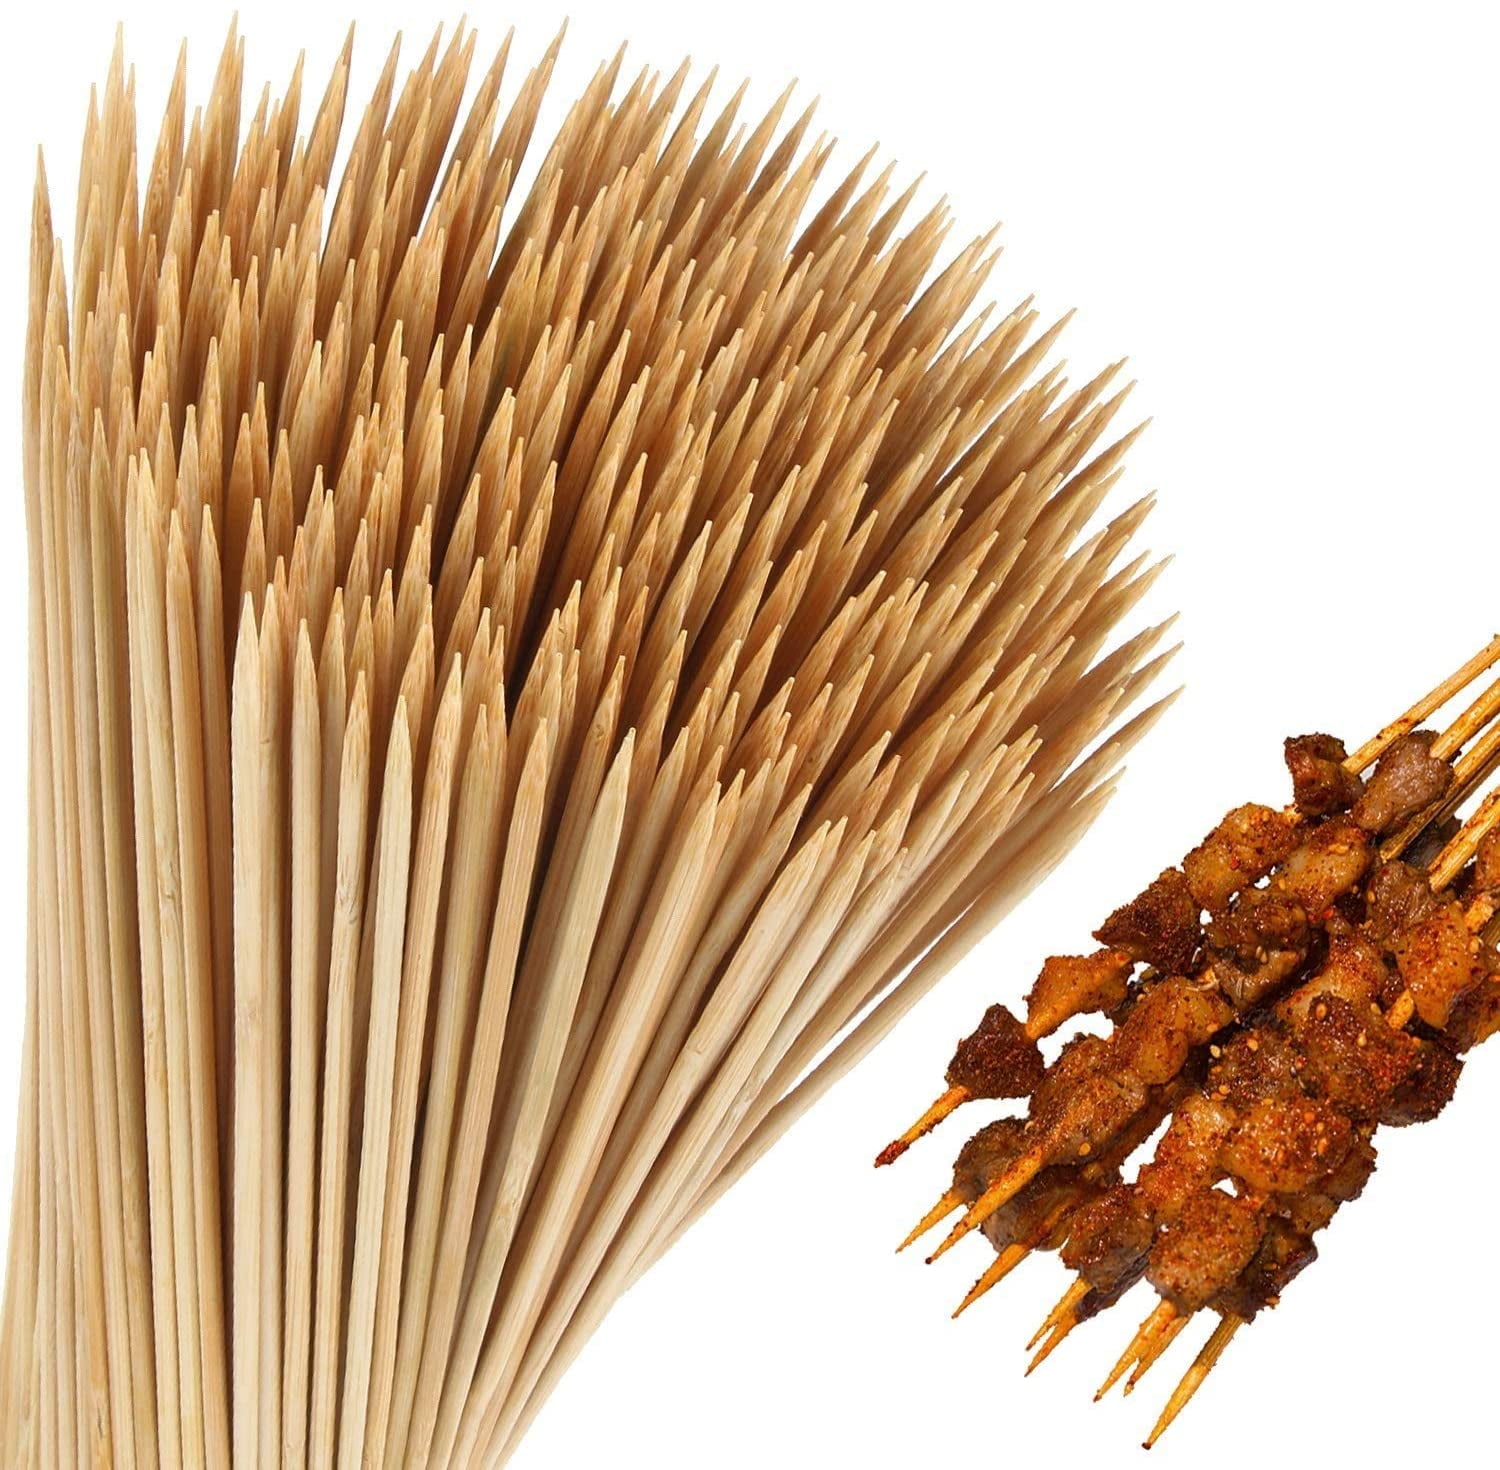 50 Pcs Sticks BBQ Bamboo Wood Grill Skewers Natural Wooden Stick Barbecue Tools 